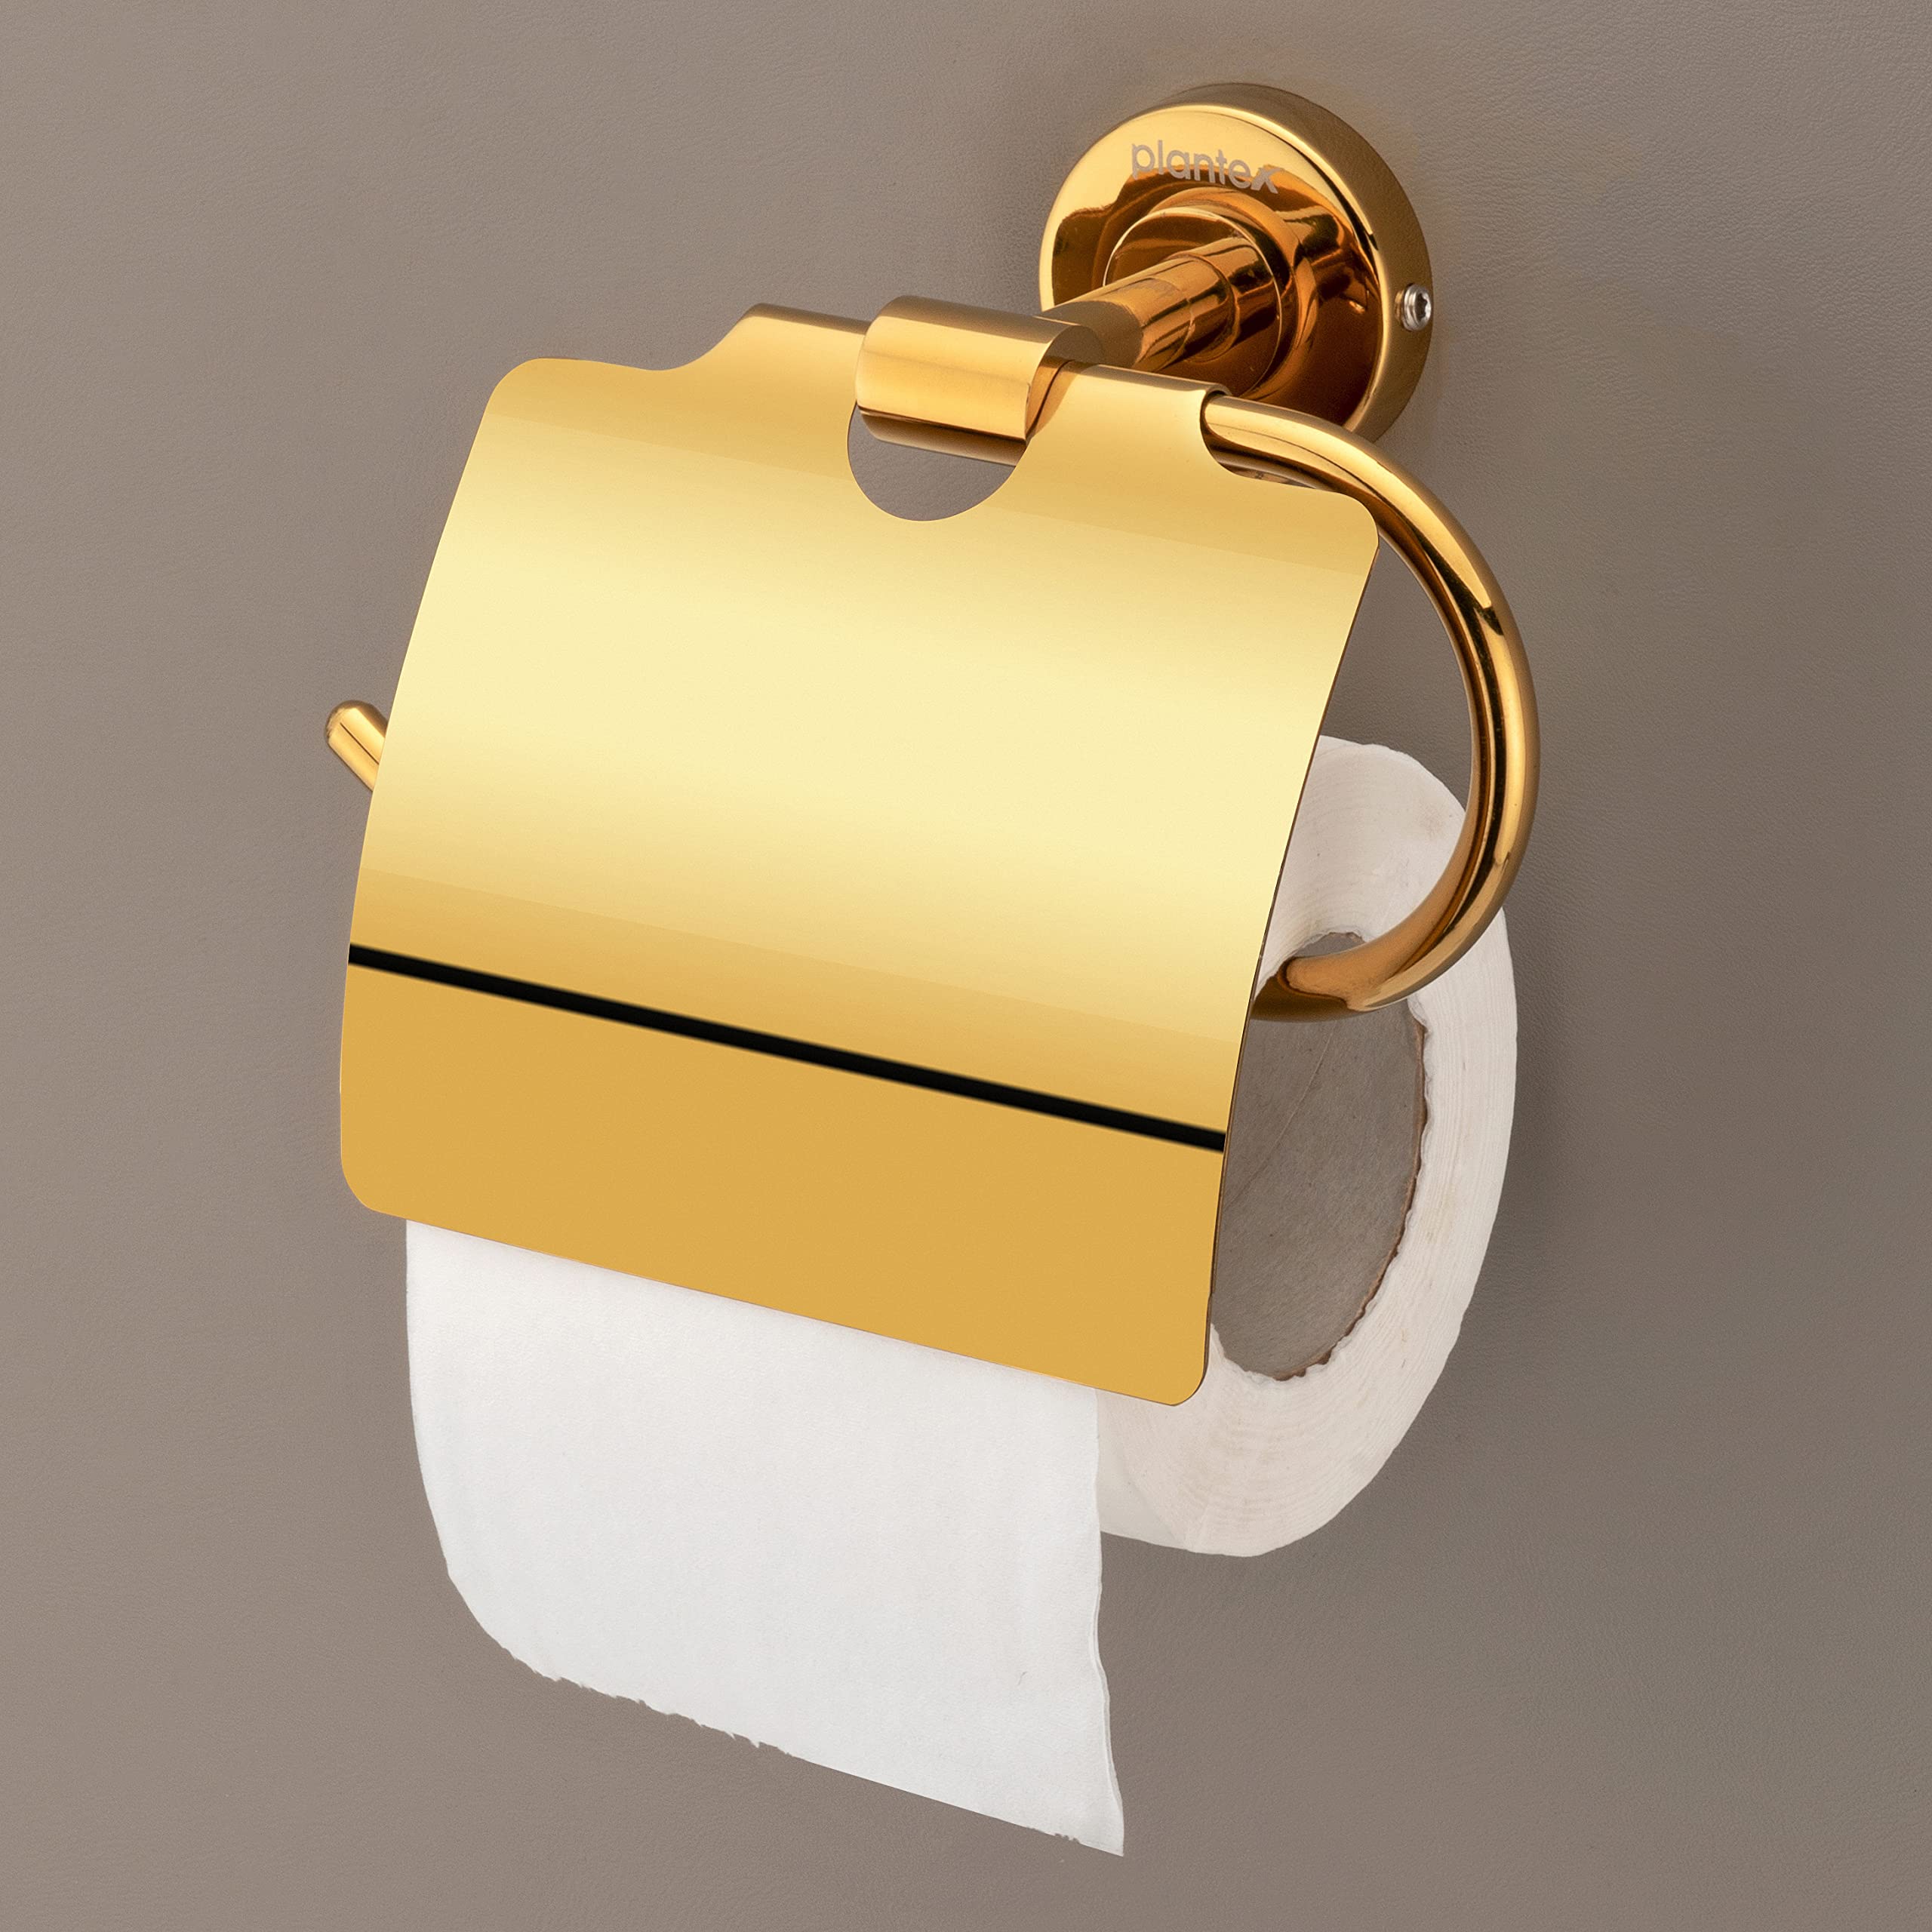 Plantex 304 Grade Stainless Steel Daizy Toilet Paper Roll Holder/Tissue Paper Holder for Bathroom/Bathroom Accessories - Pack of 3 (APS-954 - PVD Gold)